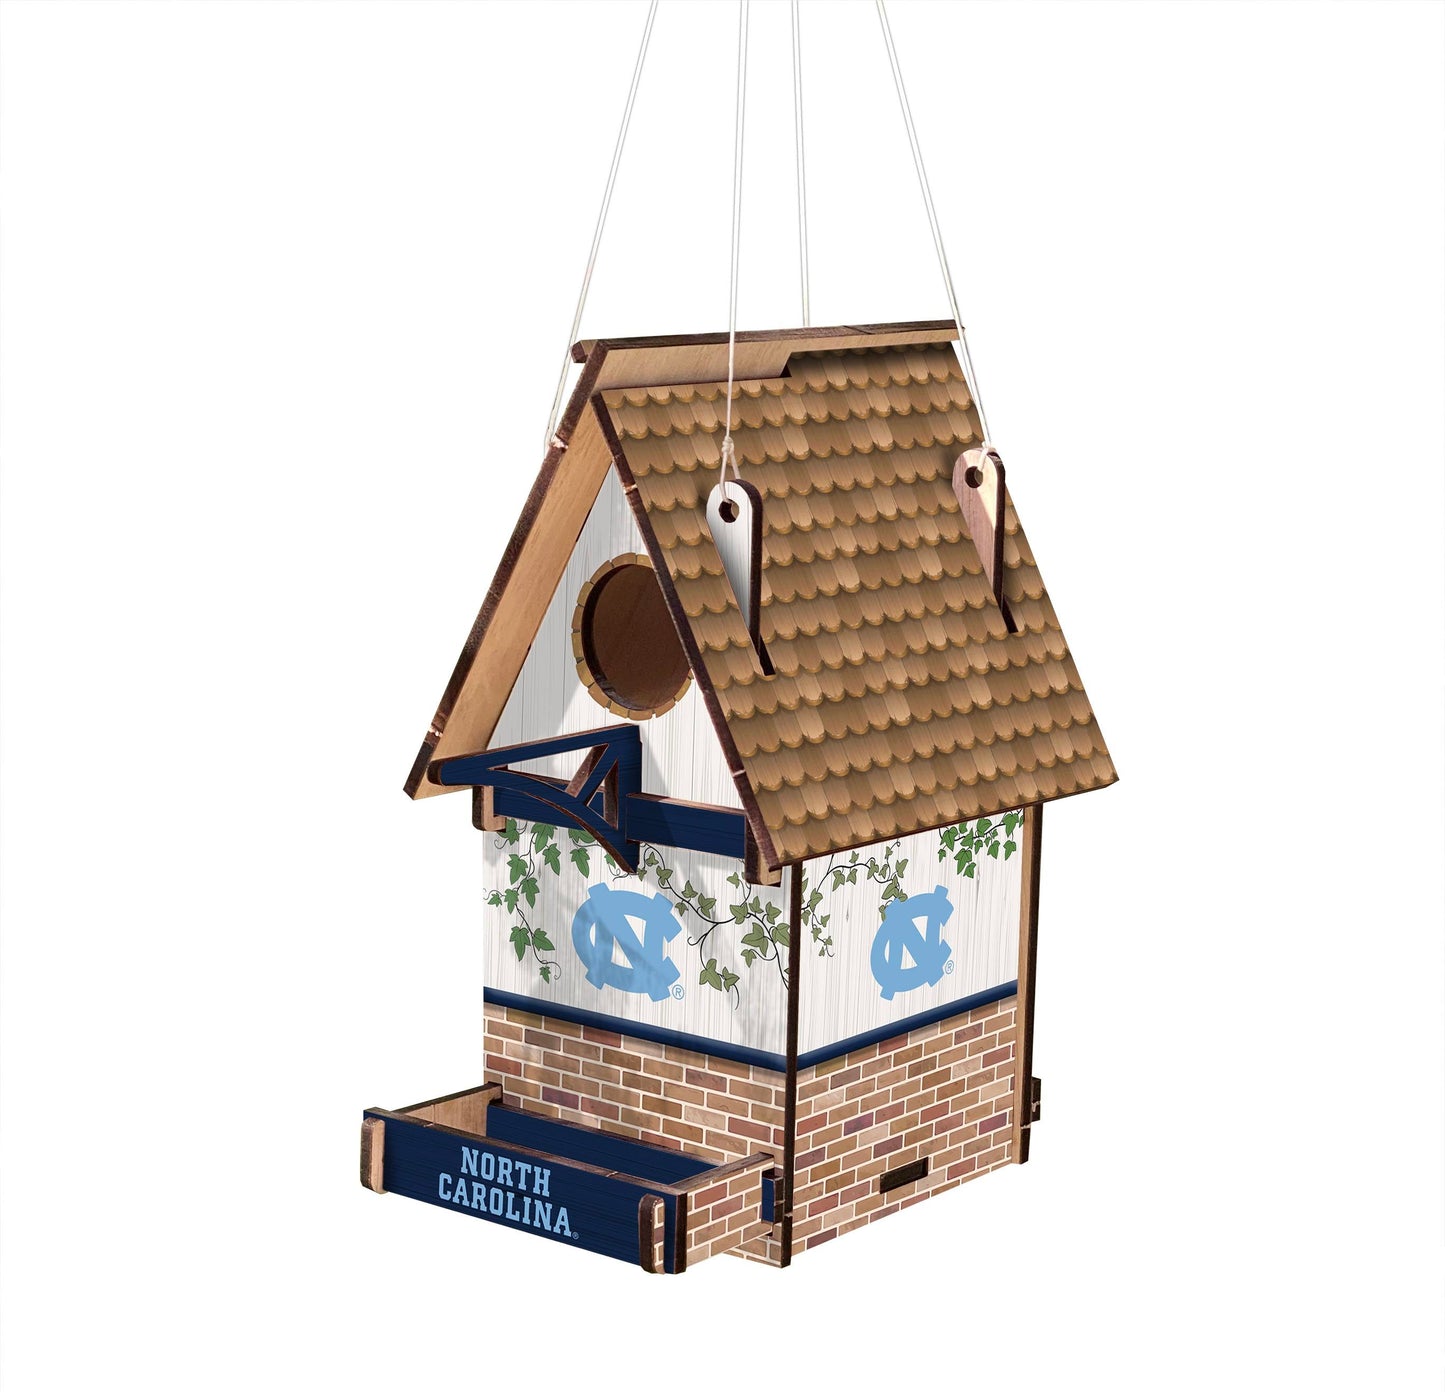 Show your support for the North Carolina Tar Heels with this officially licensed birdhouse. Cut and printed in MDF wood featuring team graphics and colors.